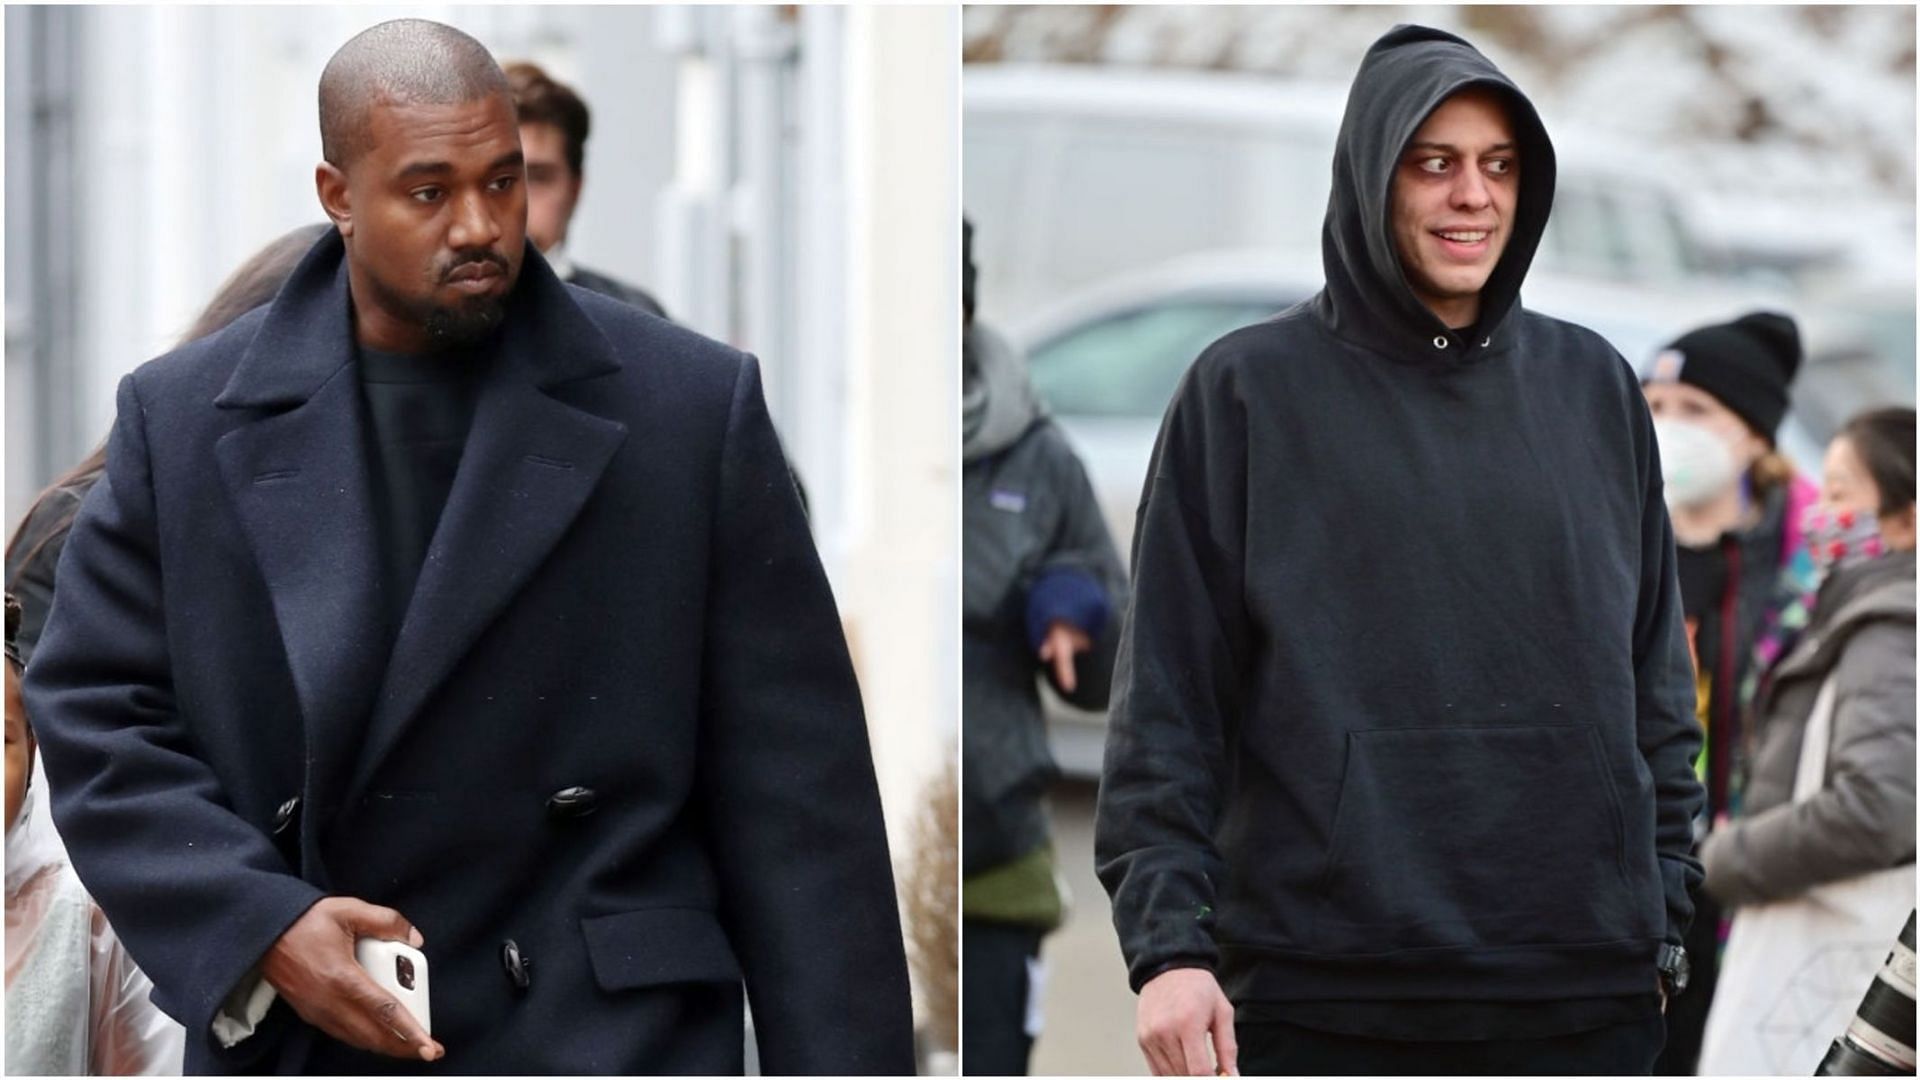 Pete Davidson&#039;s face was cut from a throwback picture shared by Kanye West (Images via Neil Mockford and James Devaney/Getty Images)